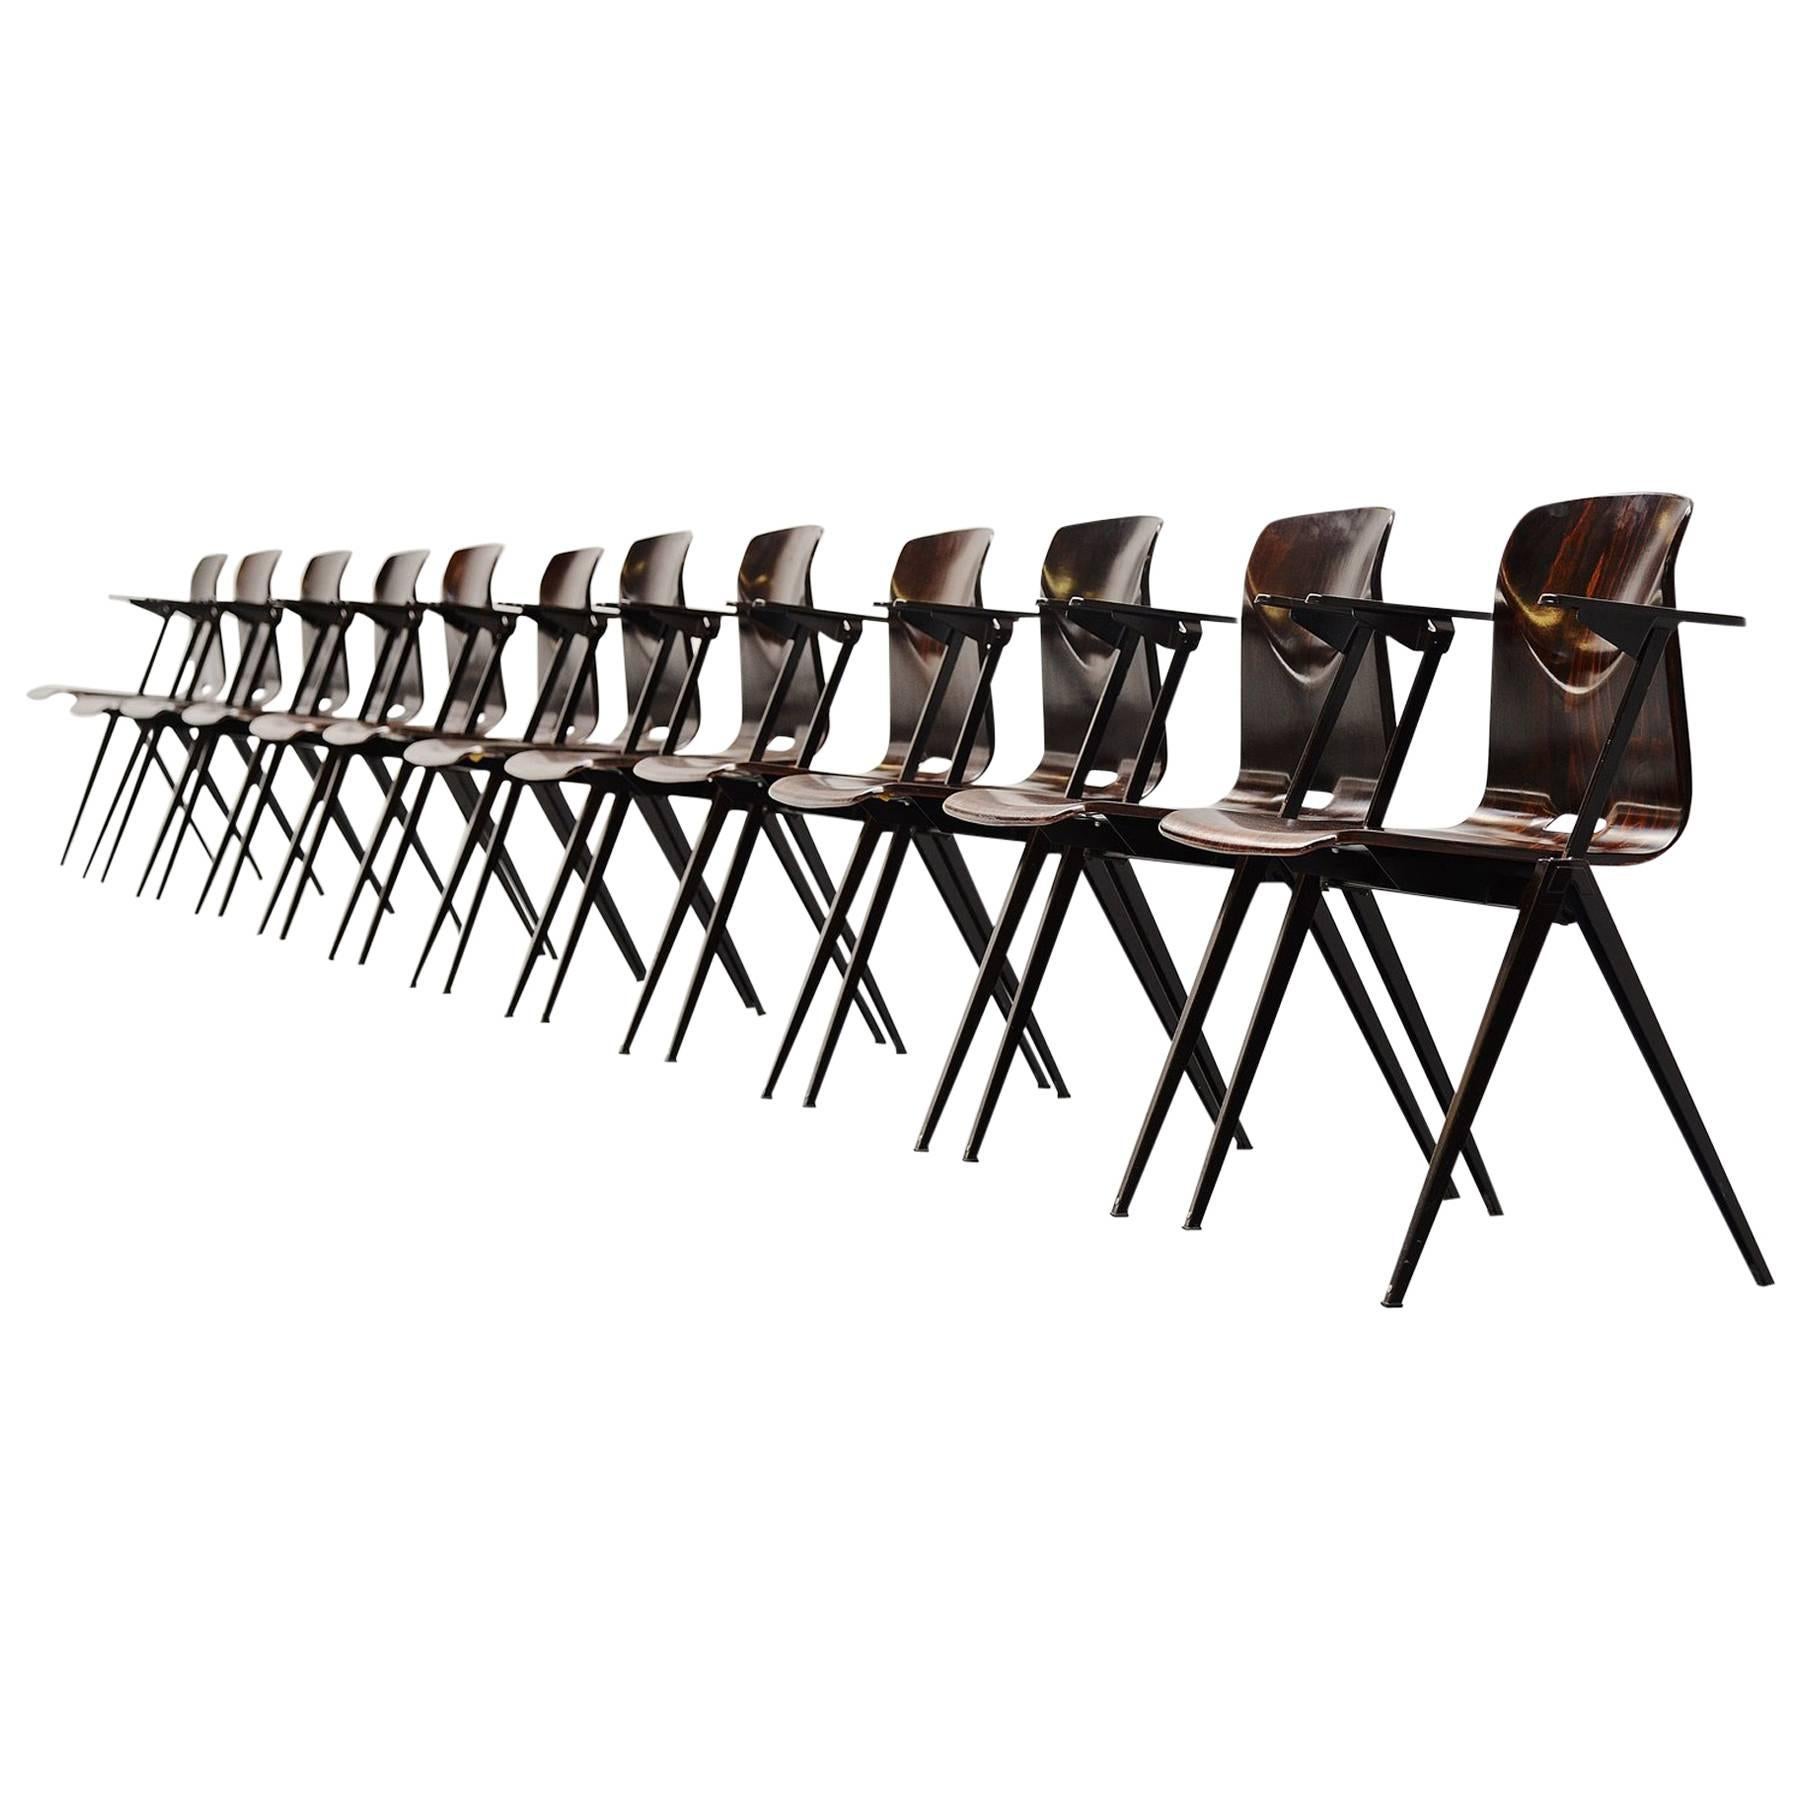 Pagholz Stacking Chairs with Arms Set of 12 Germany, 1970